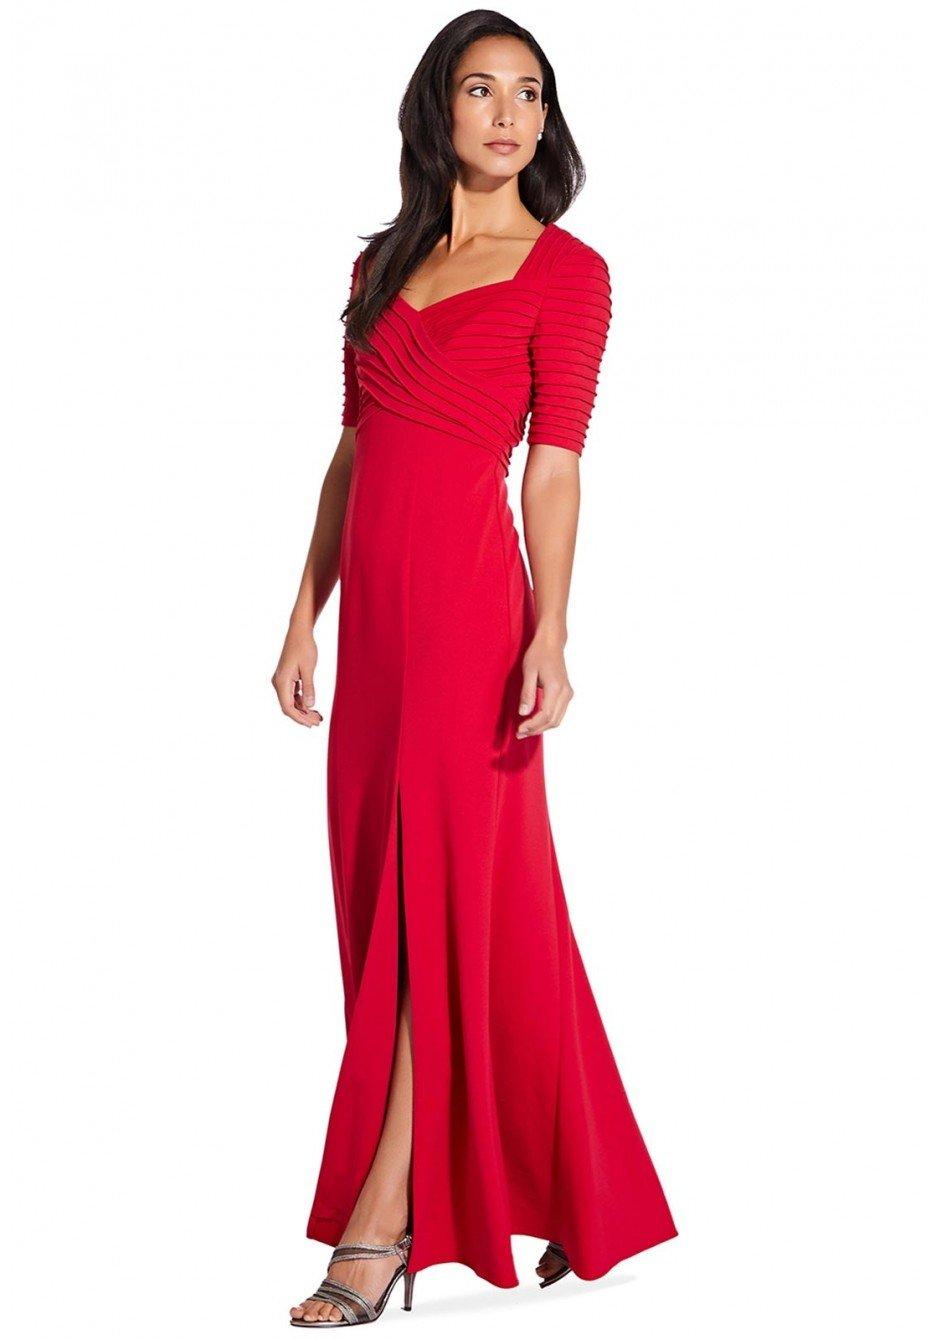 Adrianna Papell Ap1e206013 V-neck Ribbed Sheath Dress in Red - Lyst